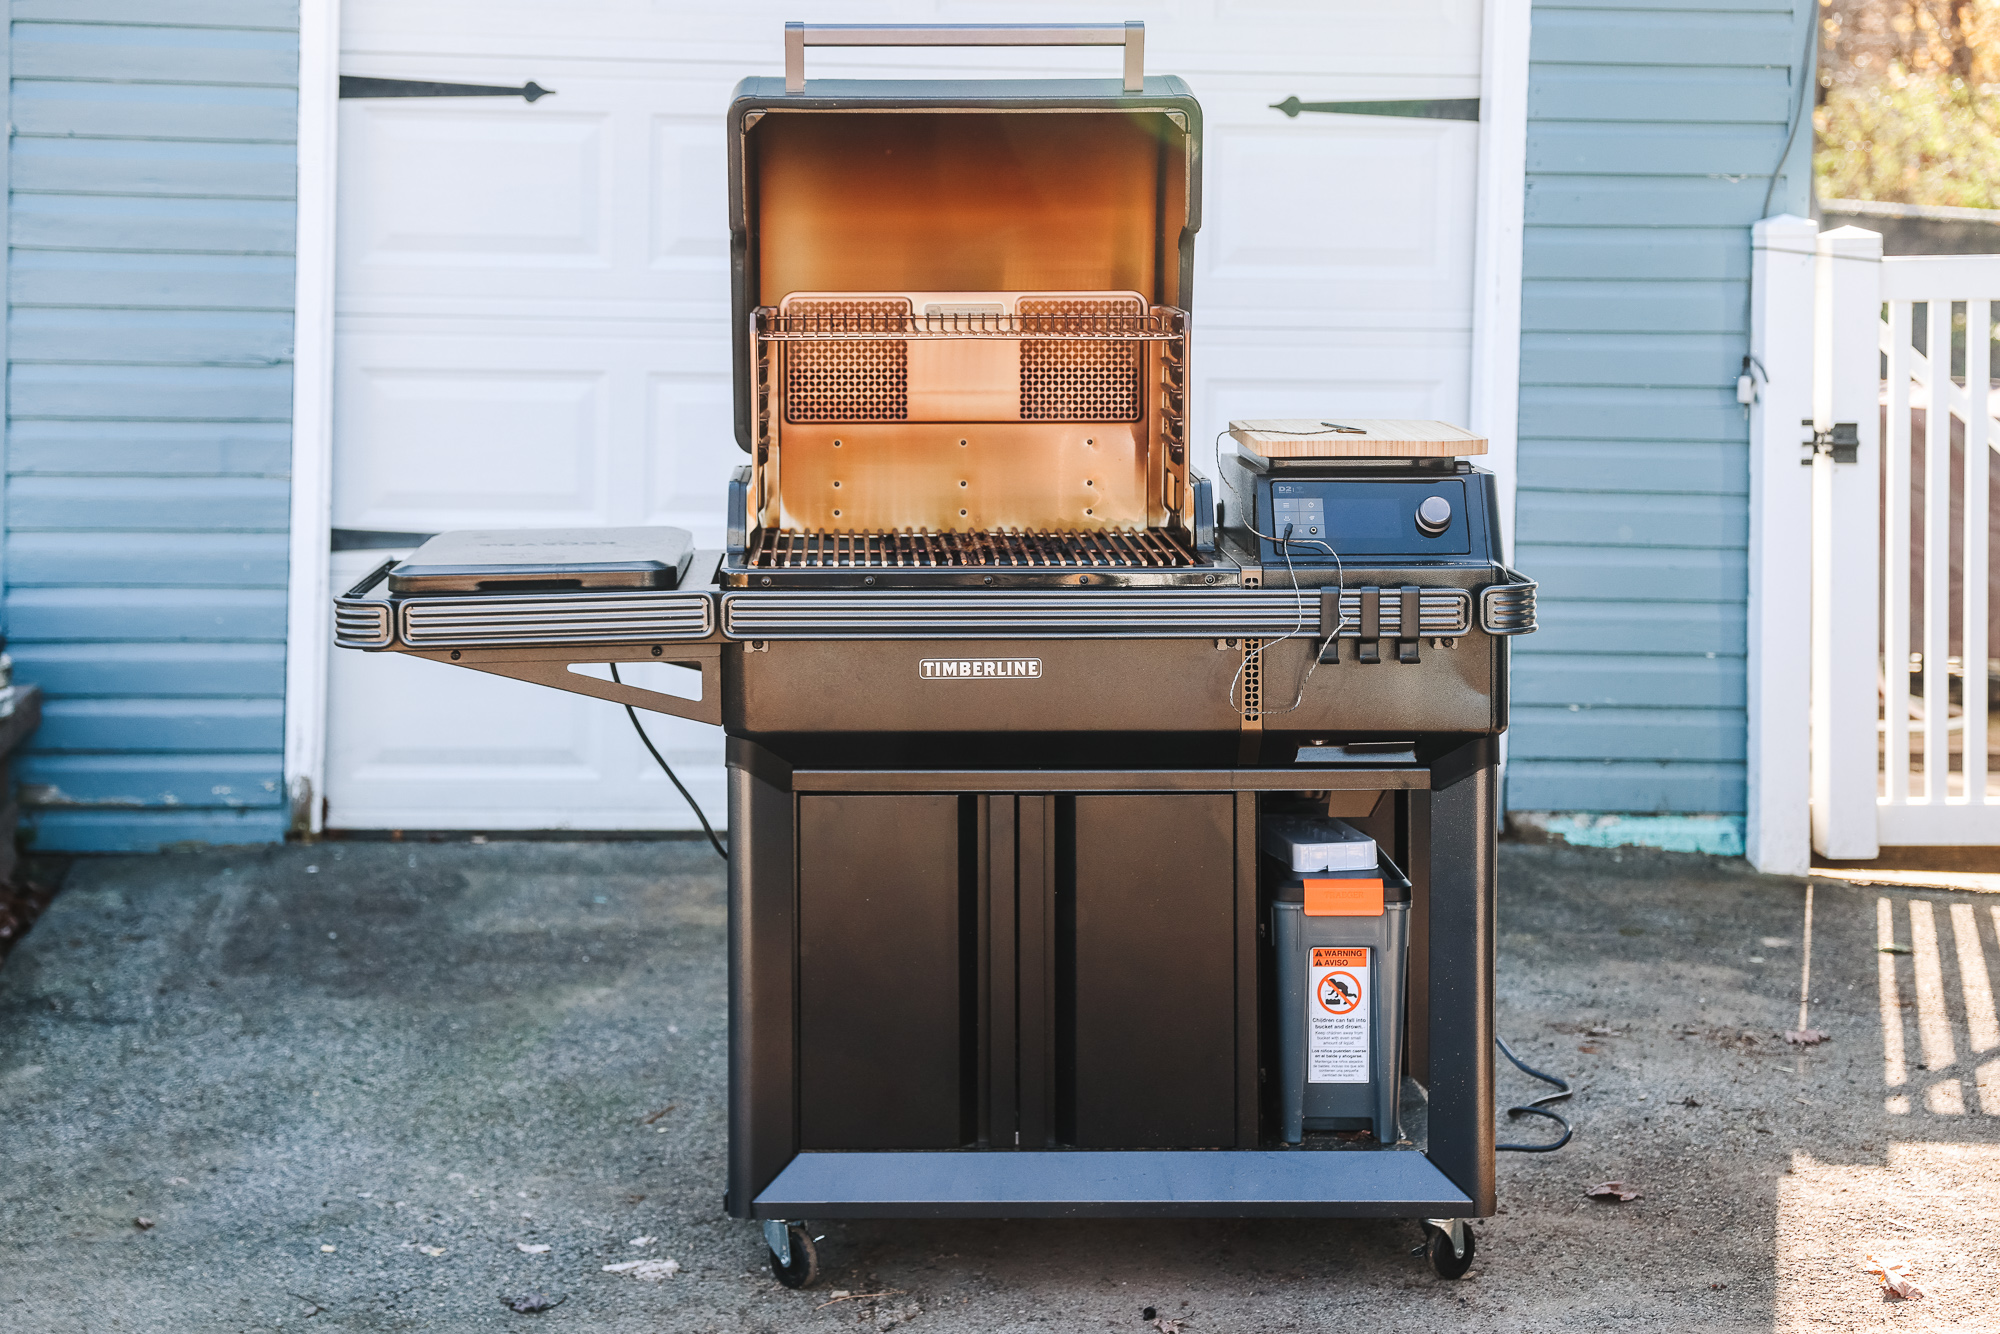 Traeger Timberline XL Grill Review 2023